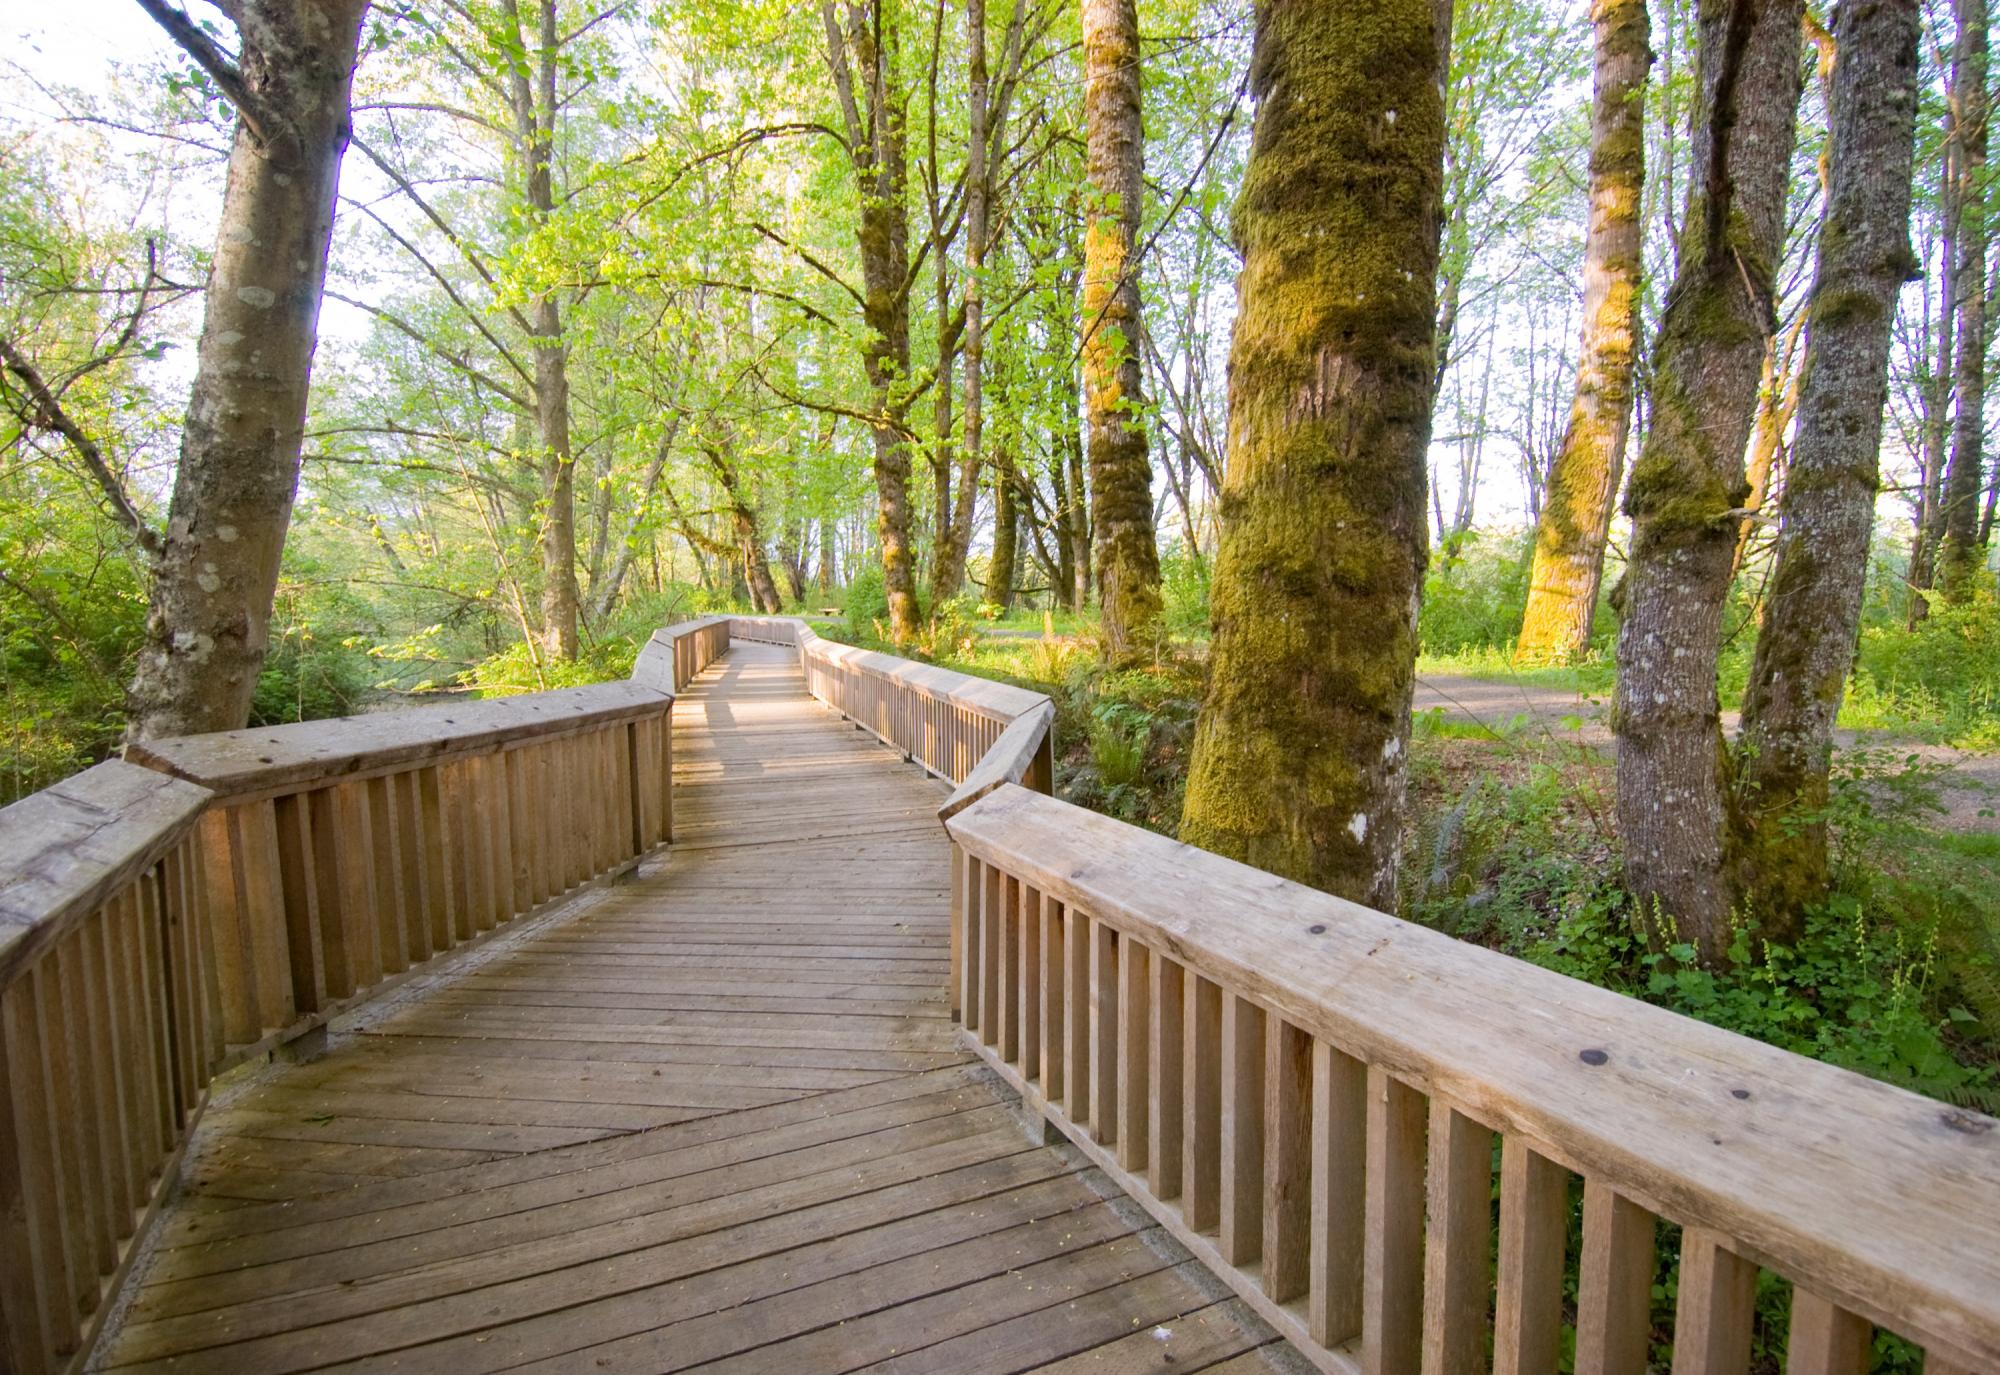 Wooden walkway in forest at dusk